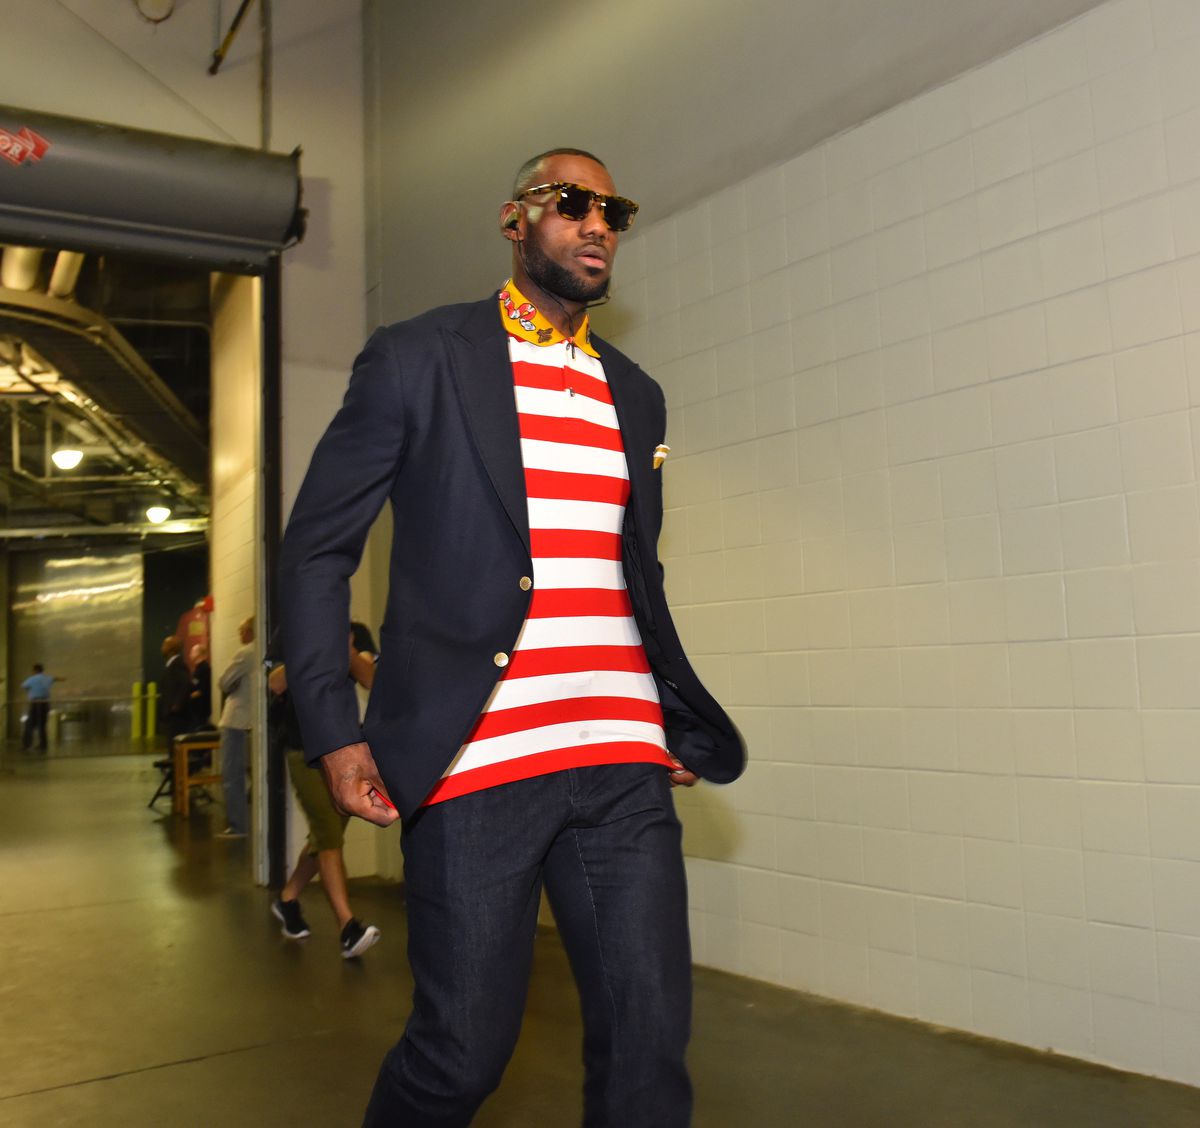 ATLANTA,GA - MAY 8 : LeBron James #23 of the Cleveland Cavaliers arrives for the game against the Atlanta Hawks during the Eastern Conference Semifinals Game Four on May 8, 2016 at The Philips Arena in Atlanta Georgia NOTE TO USER: User expressly acknowledges and agrees that, by downloading and/or using this Photograph, user is consenting to the terms and conditions of the Getty Images License Agreement. Mandatory Copyright Notice: Copyright 2016 NBAE.